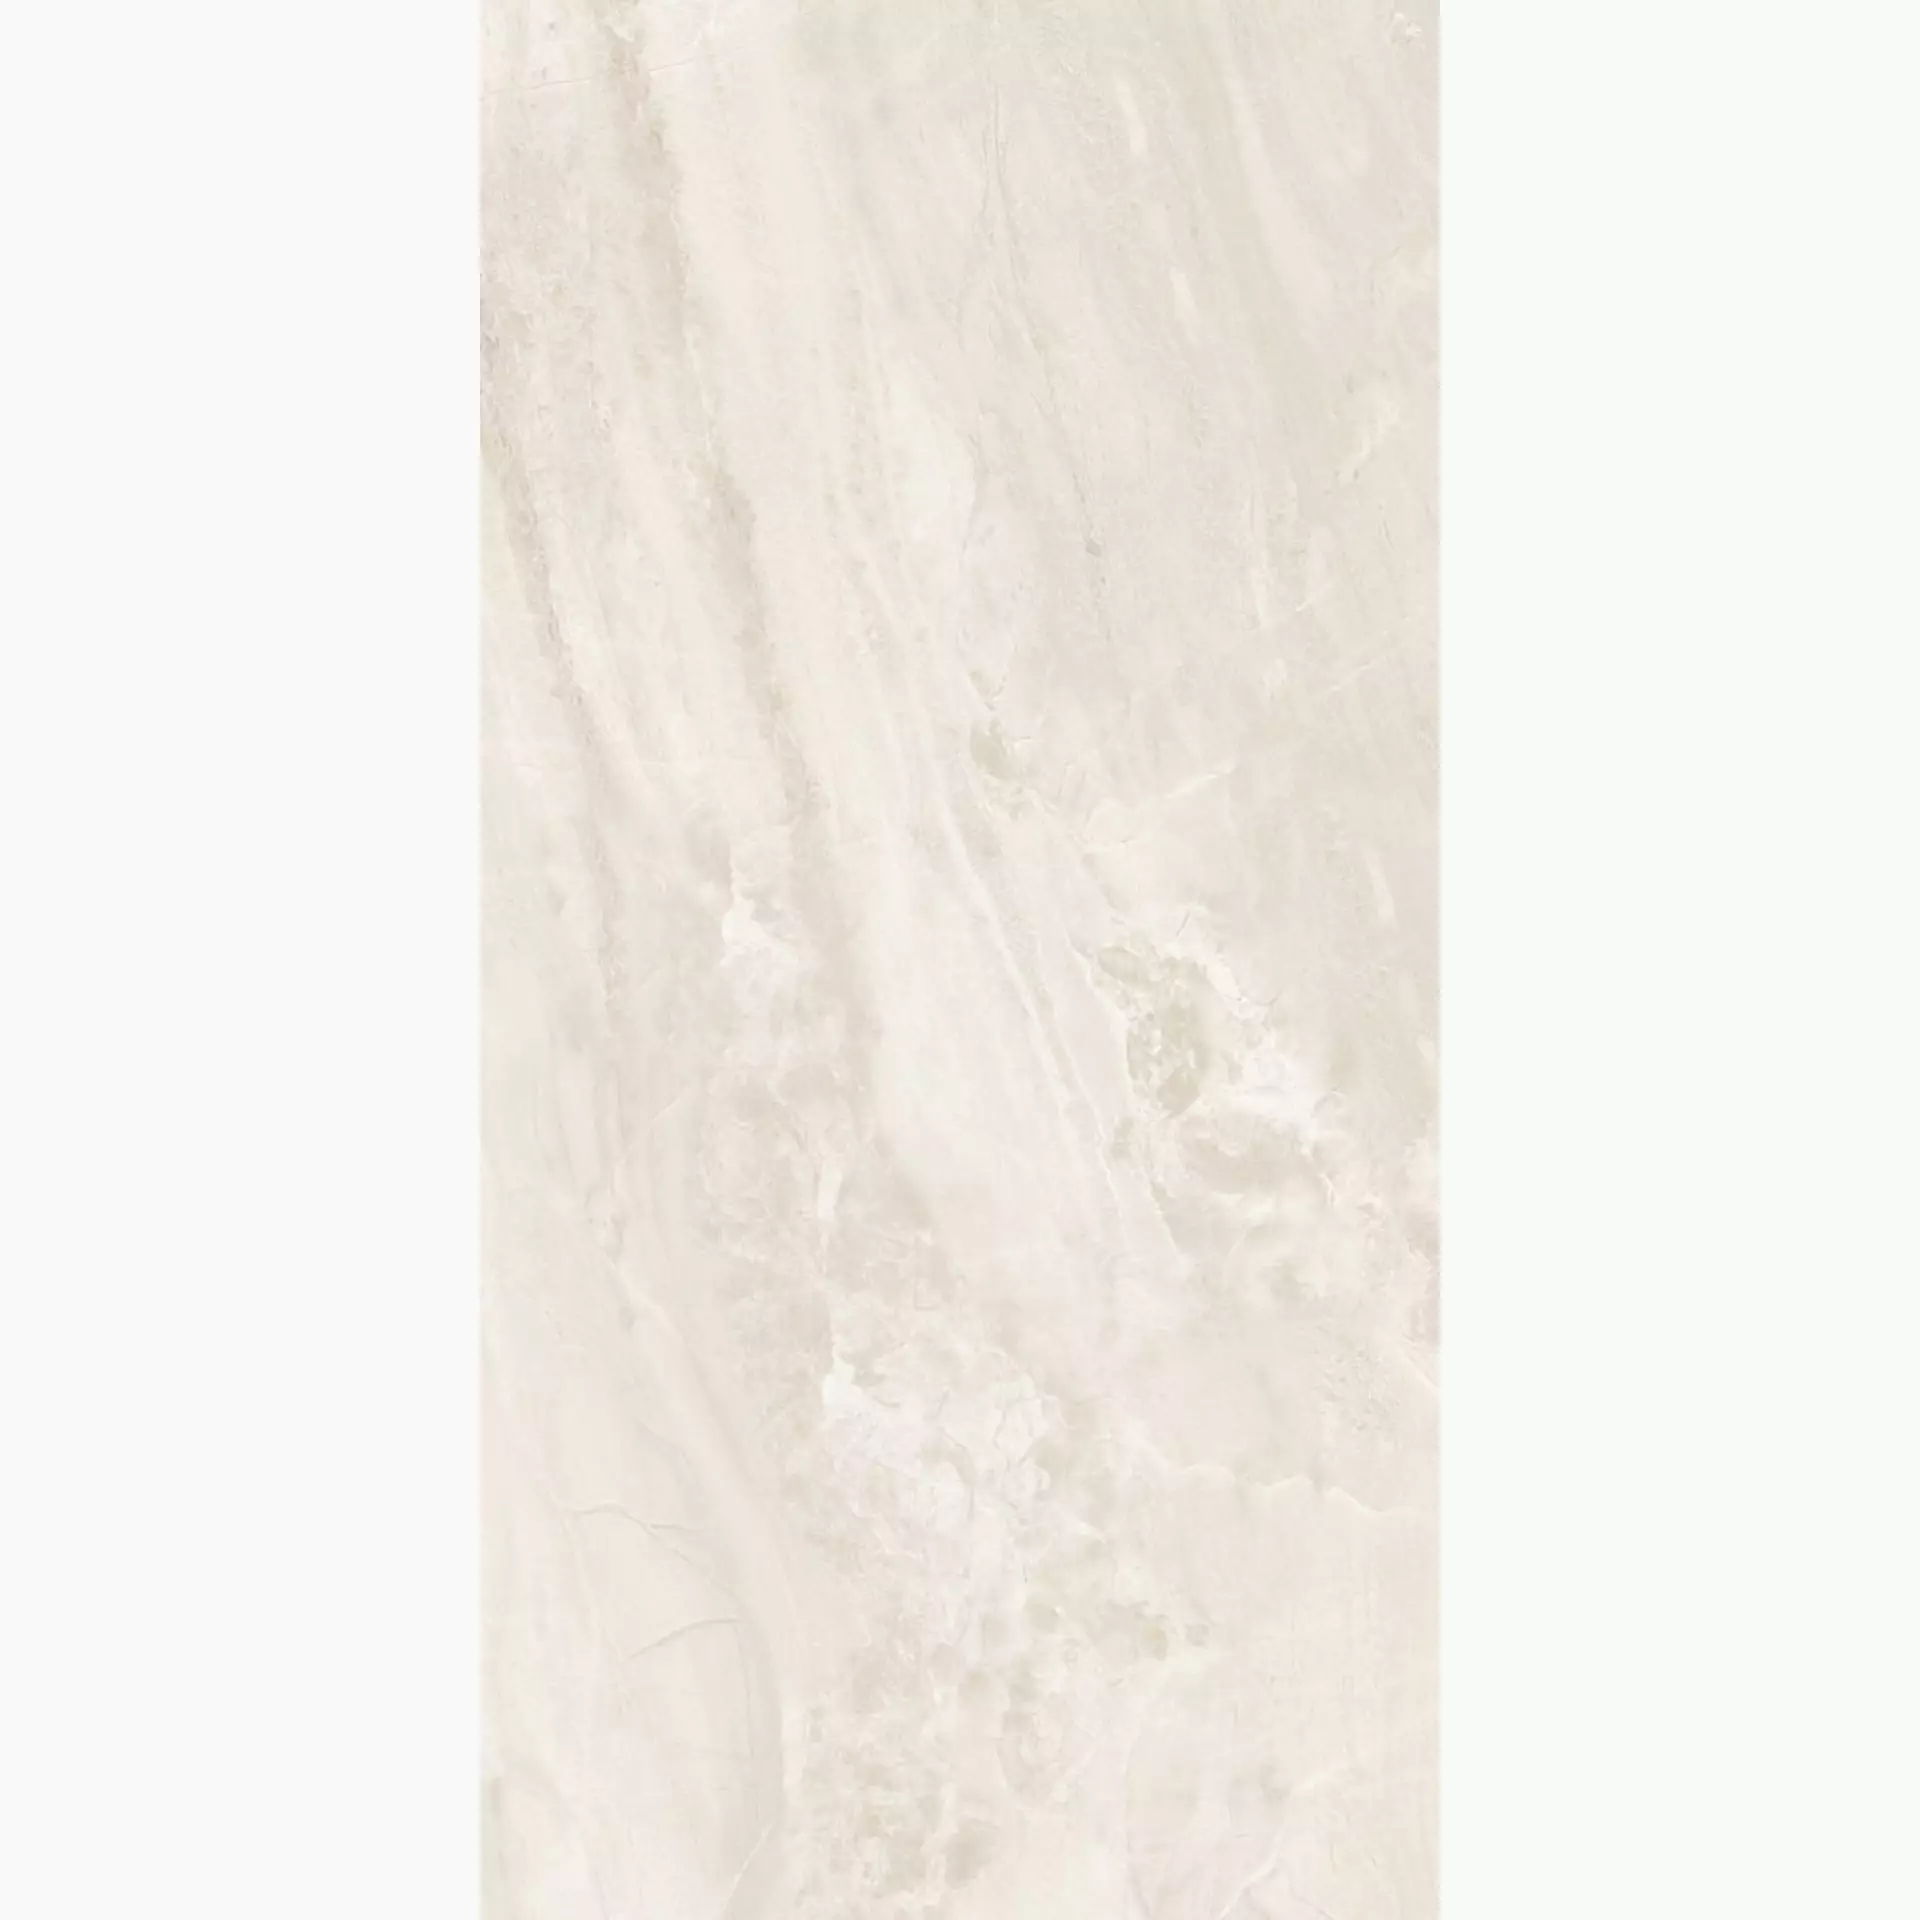 Sant Agostino Paradiso Beige Natural CSAPBEI360 30x60cm rectified 9mm